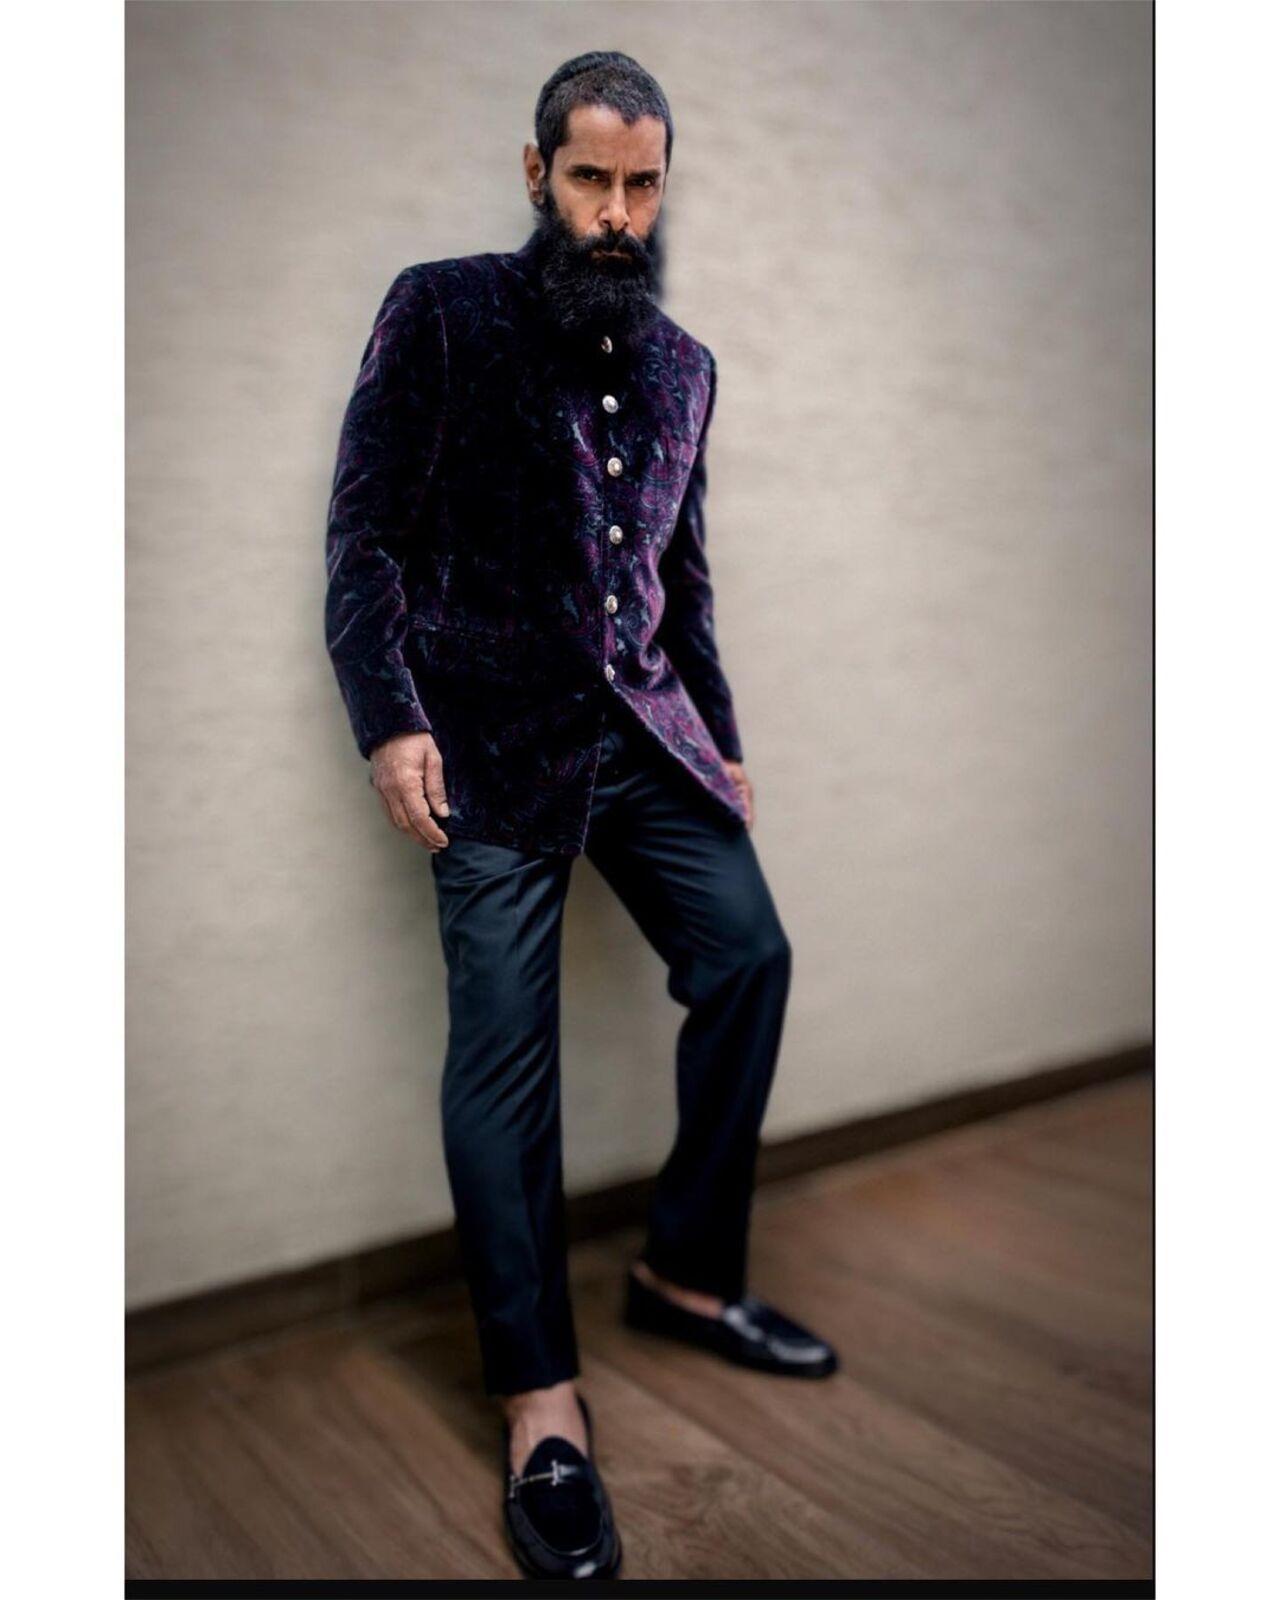 Vikram keeps it simple and classy in a pair of velvet bandh gala and formal black pants with formal leather shoes